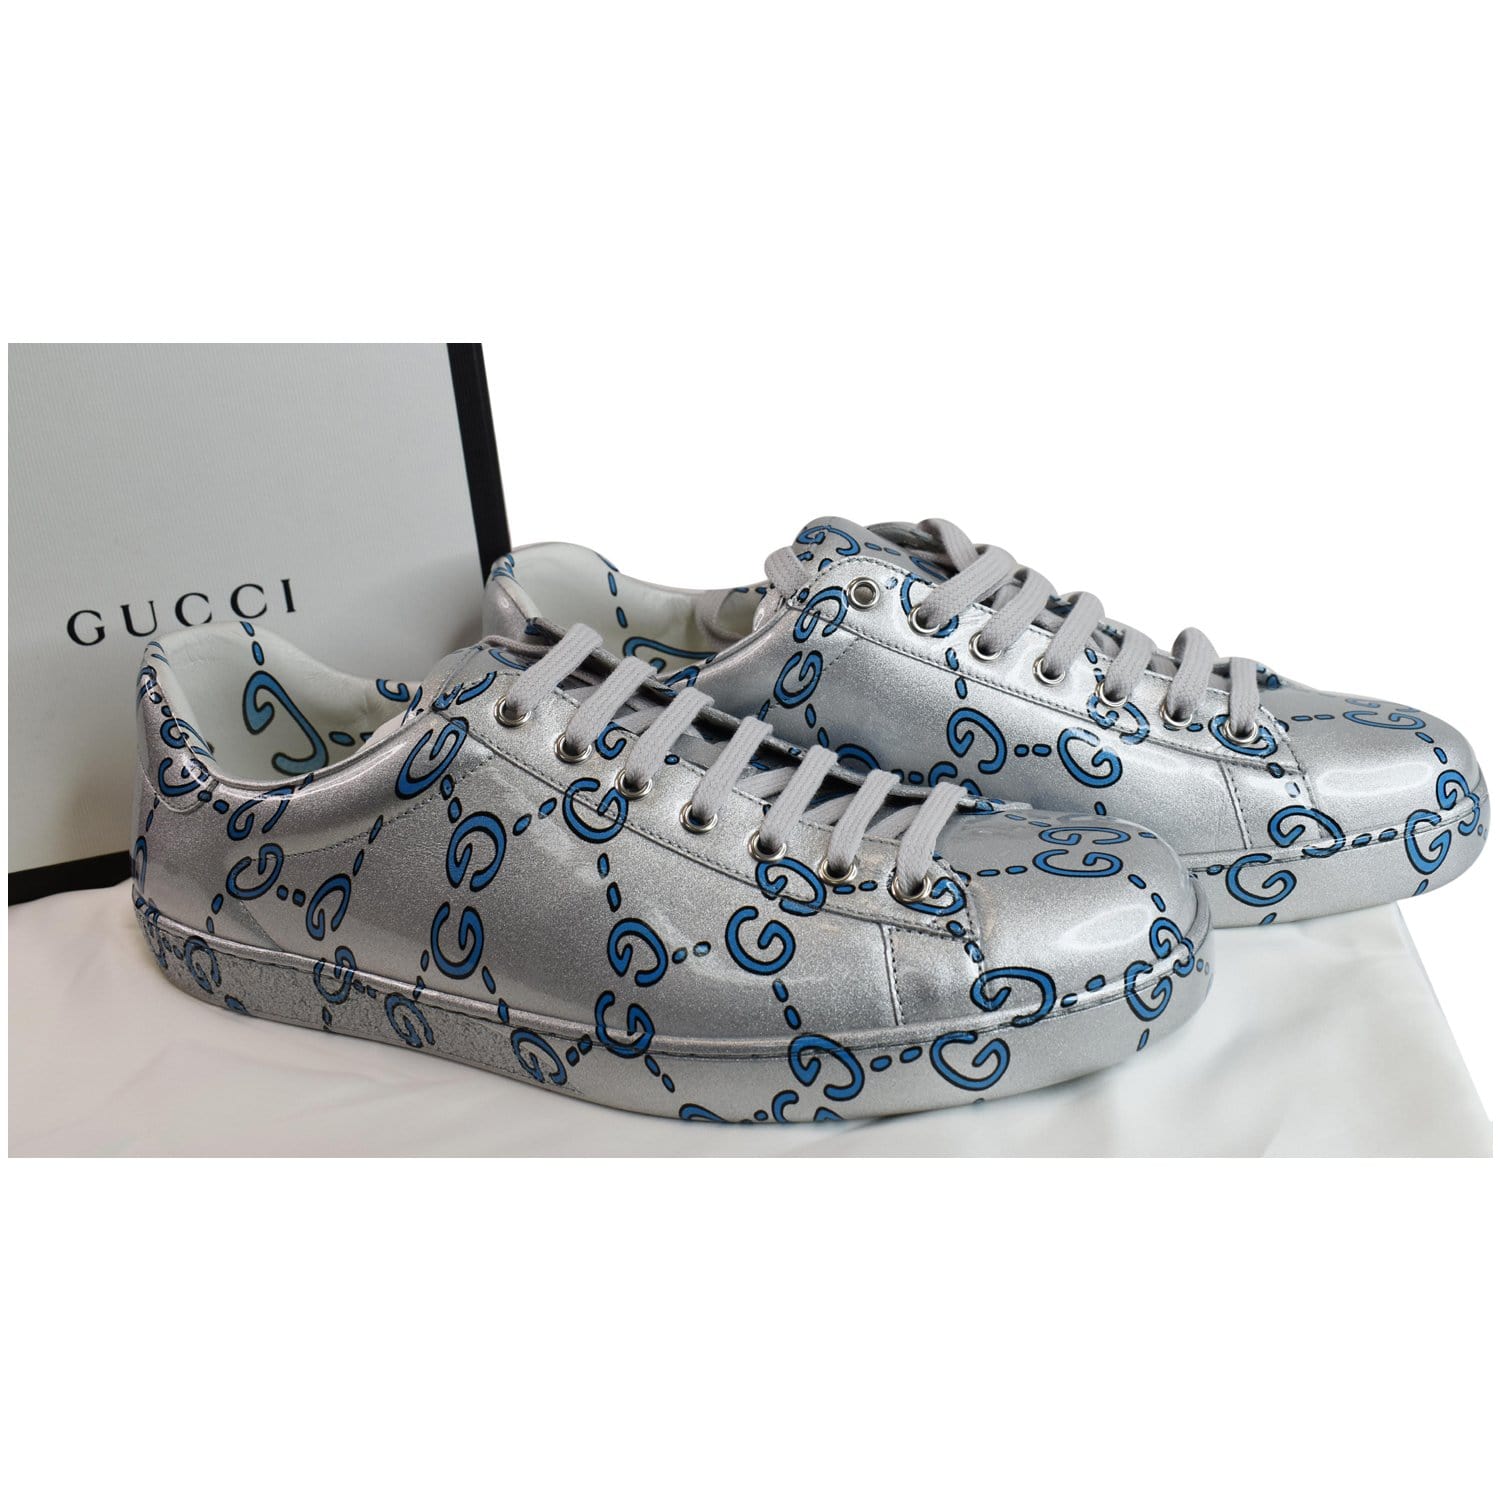 Gucci New Ace Coated Gg Supreme Sneakers - Black